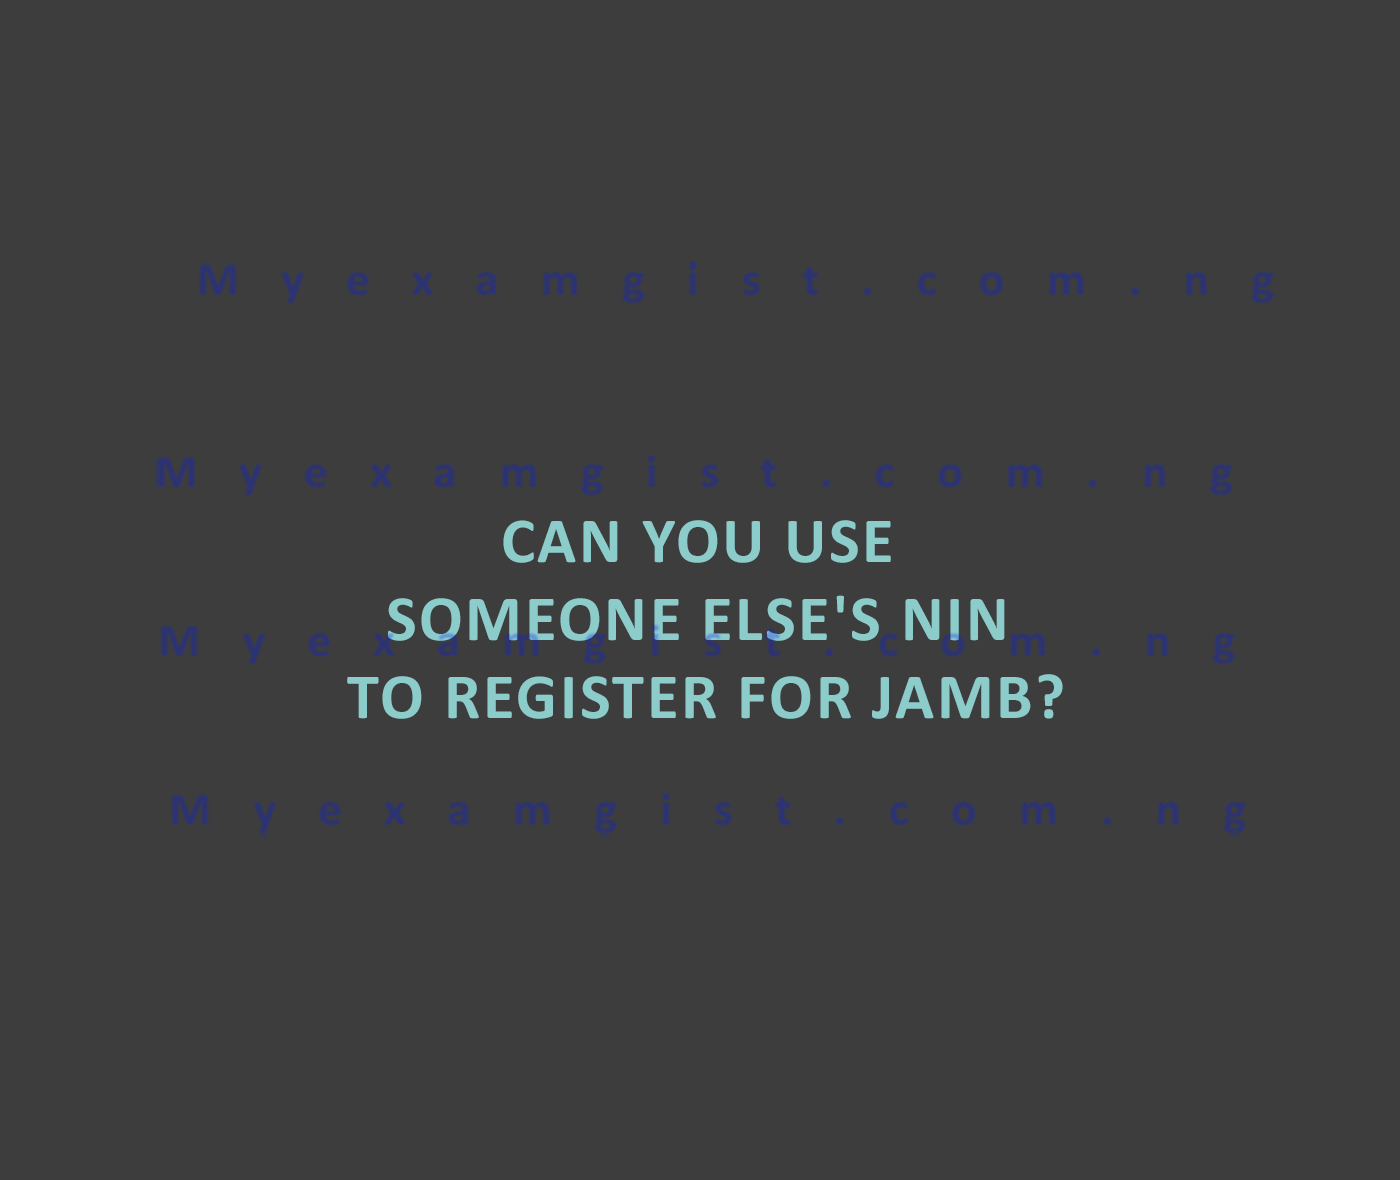 Can you use someone else's NIN to register for JAMB?